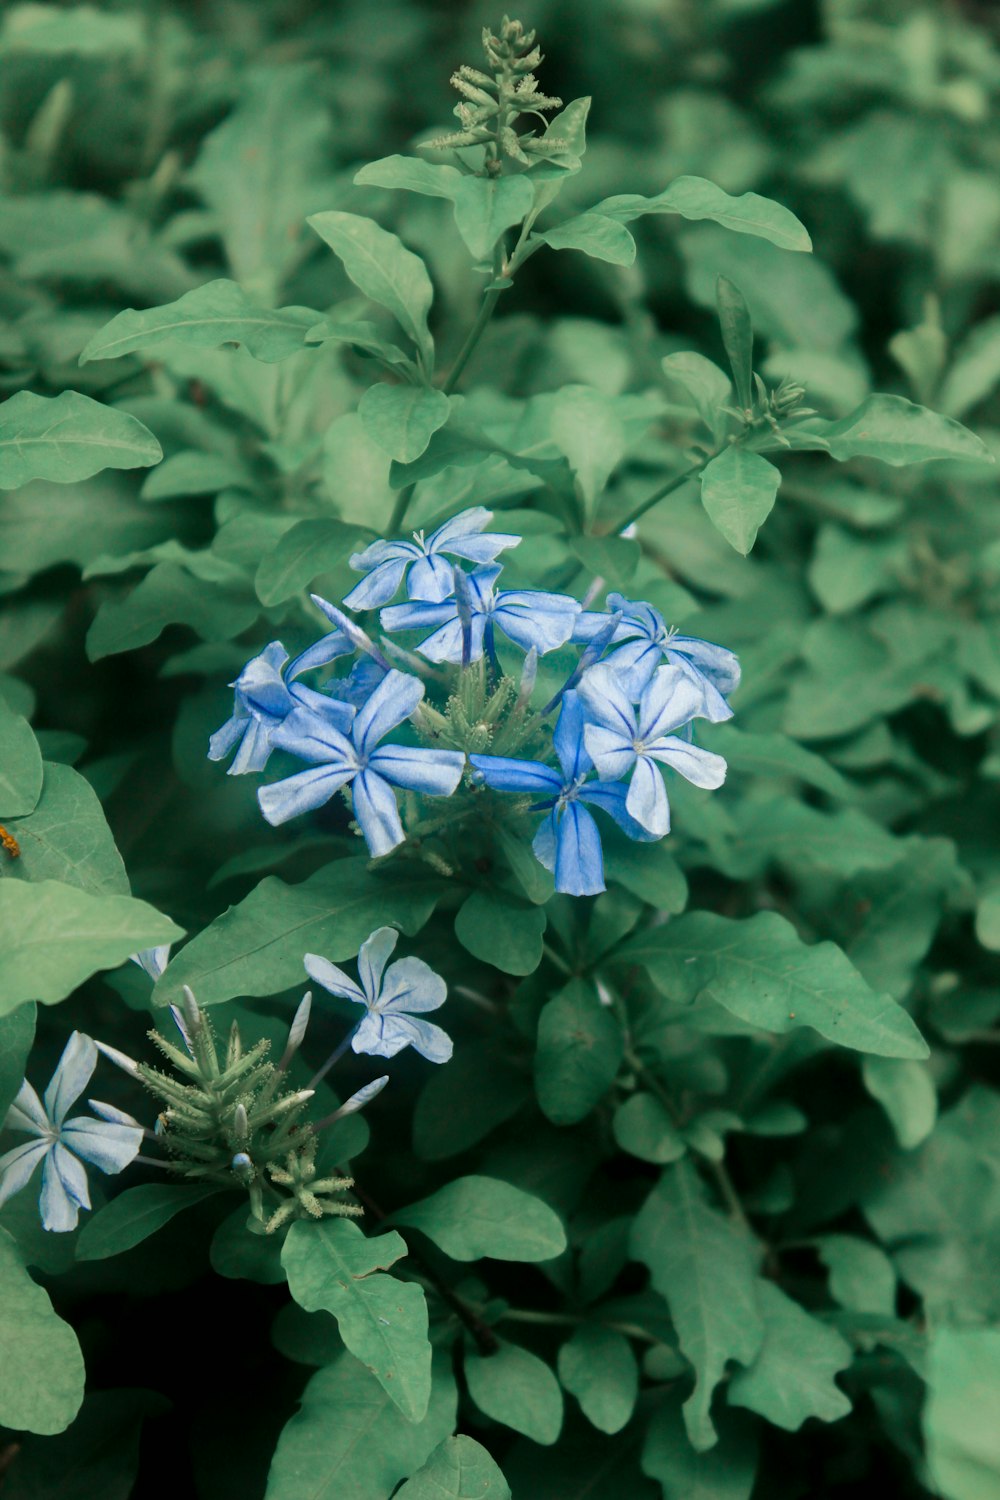 a small blue flower surrounded by green leaves